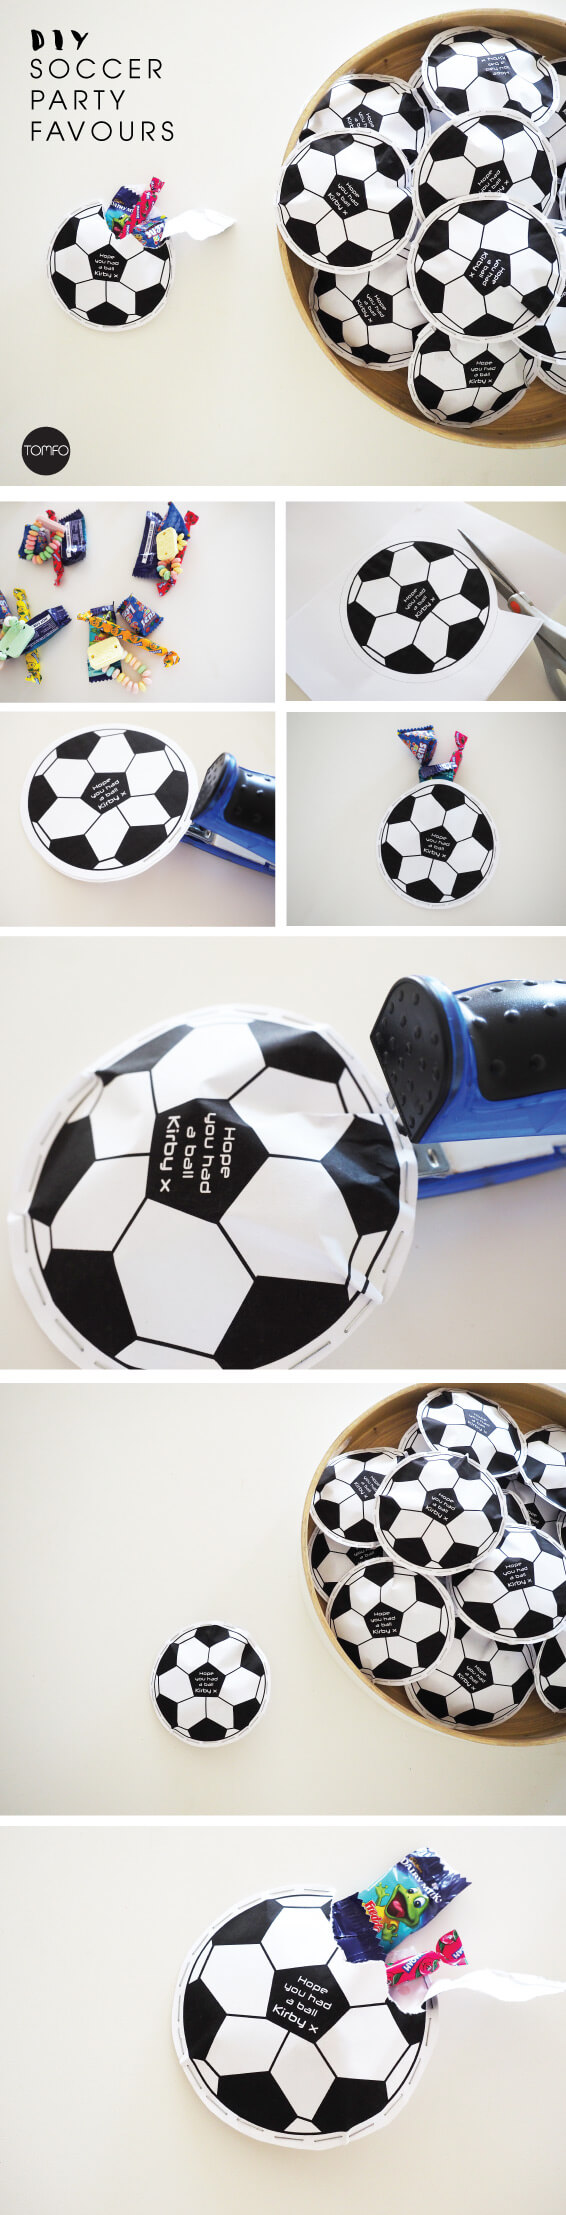 Soccer-Party-Favours--Printable-Tutorial-Tomfo